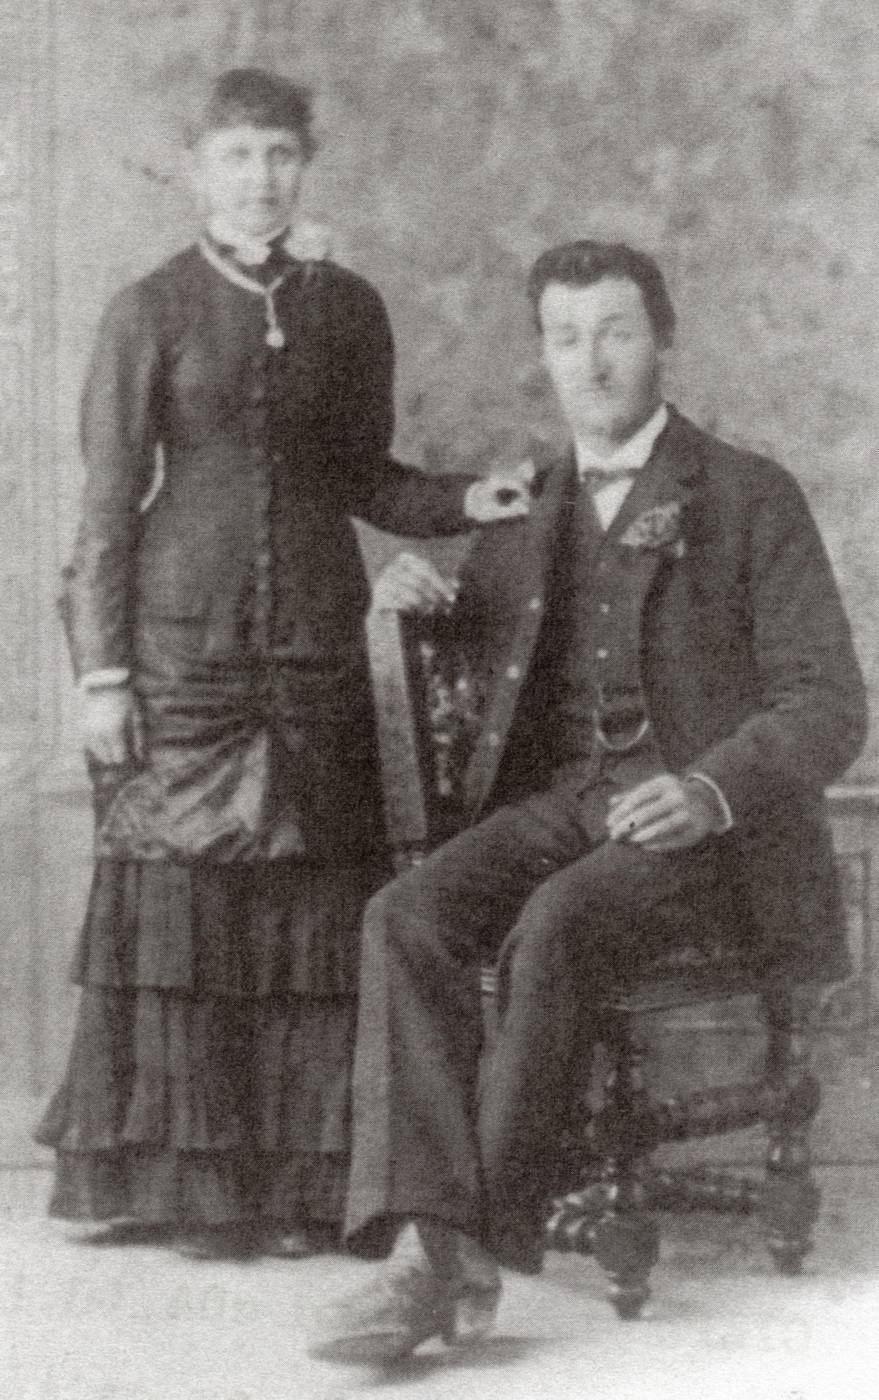 Not an obvious 
wedding photograph. August sitting sideways in a chair and Mary with her hand on his shoulder. Both in formal attire, but 
Mary not in white. Her dress has several flounces and she seems to have a flower on her shoulder and a necklace